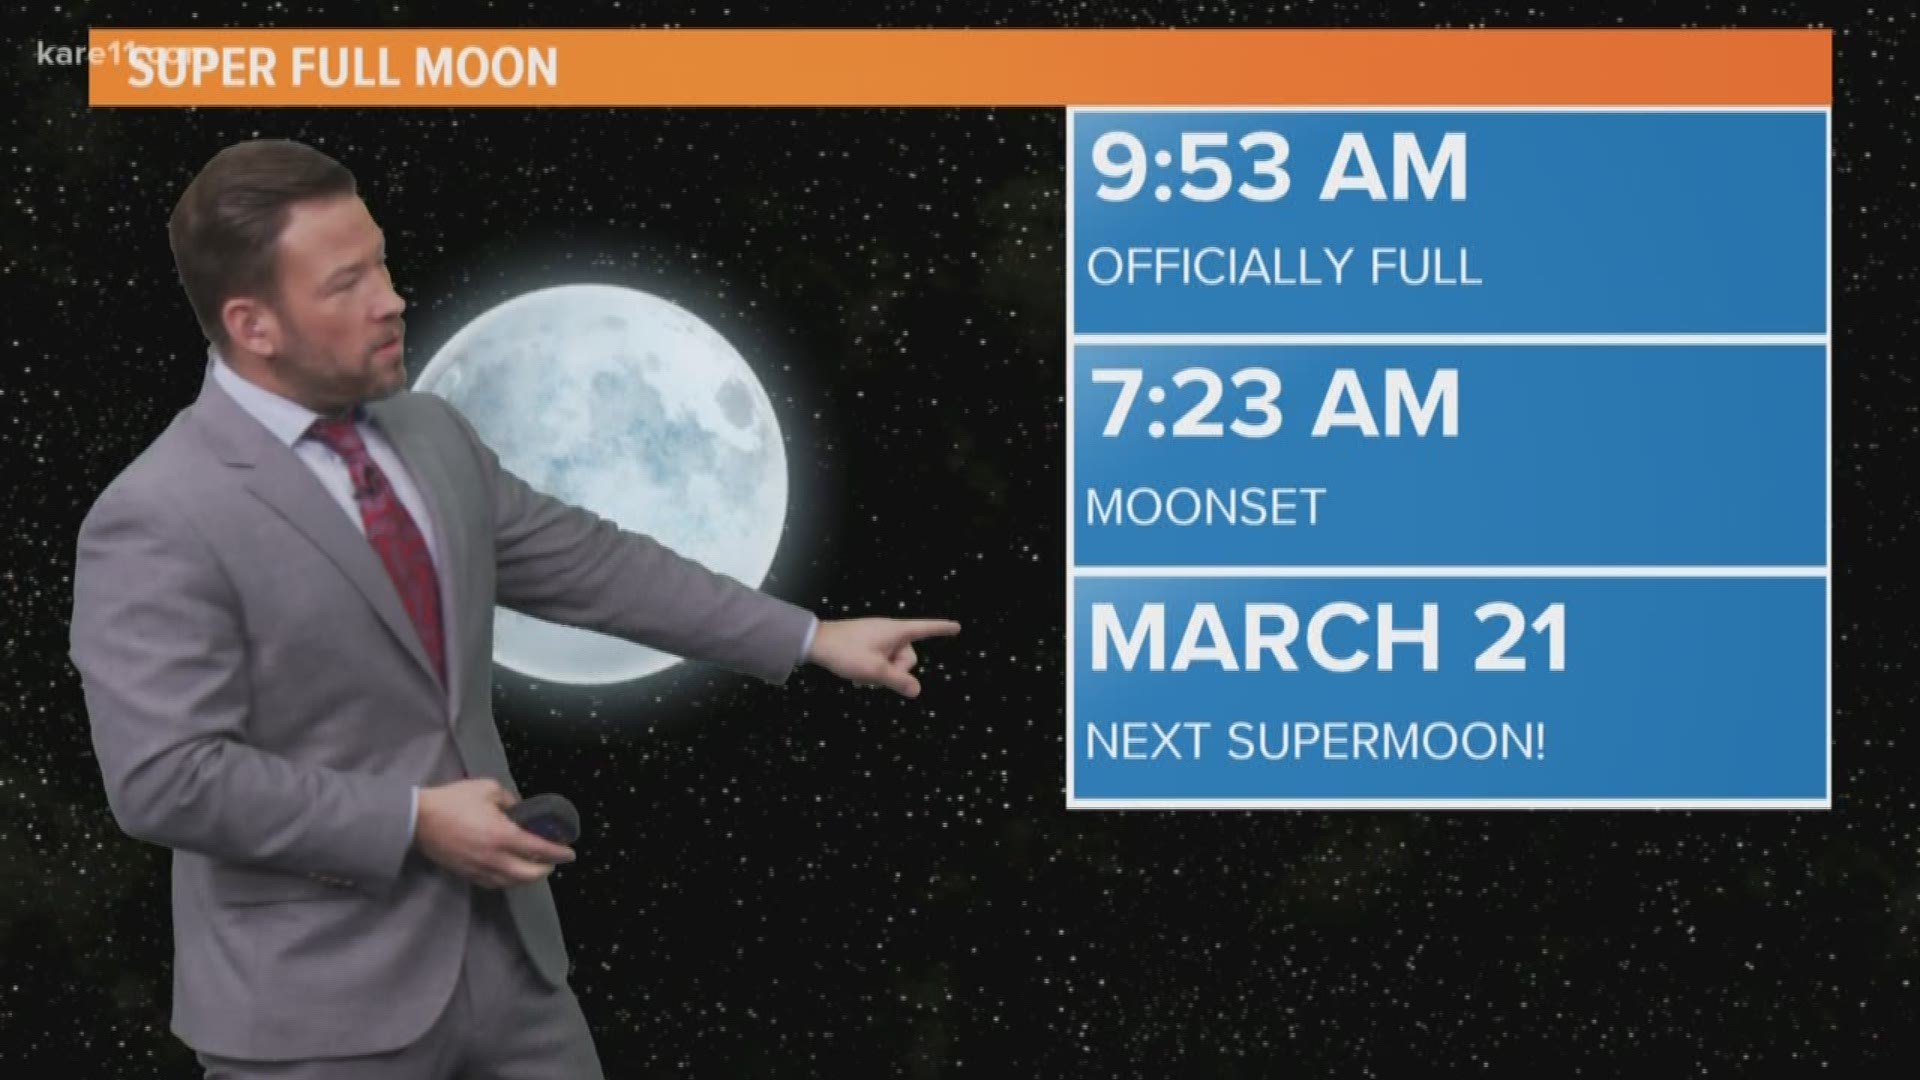 February's full moon will be the closest to Earth that it will ever be in 2019, but we can still see another supermoon sometime soon! https://kare11.tv/2GNLus6